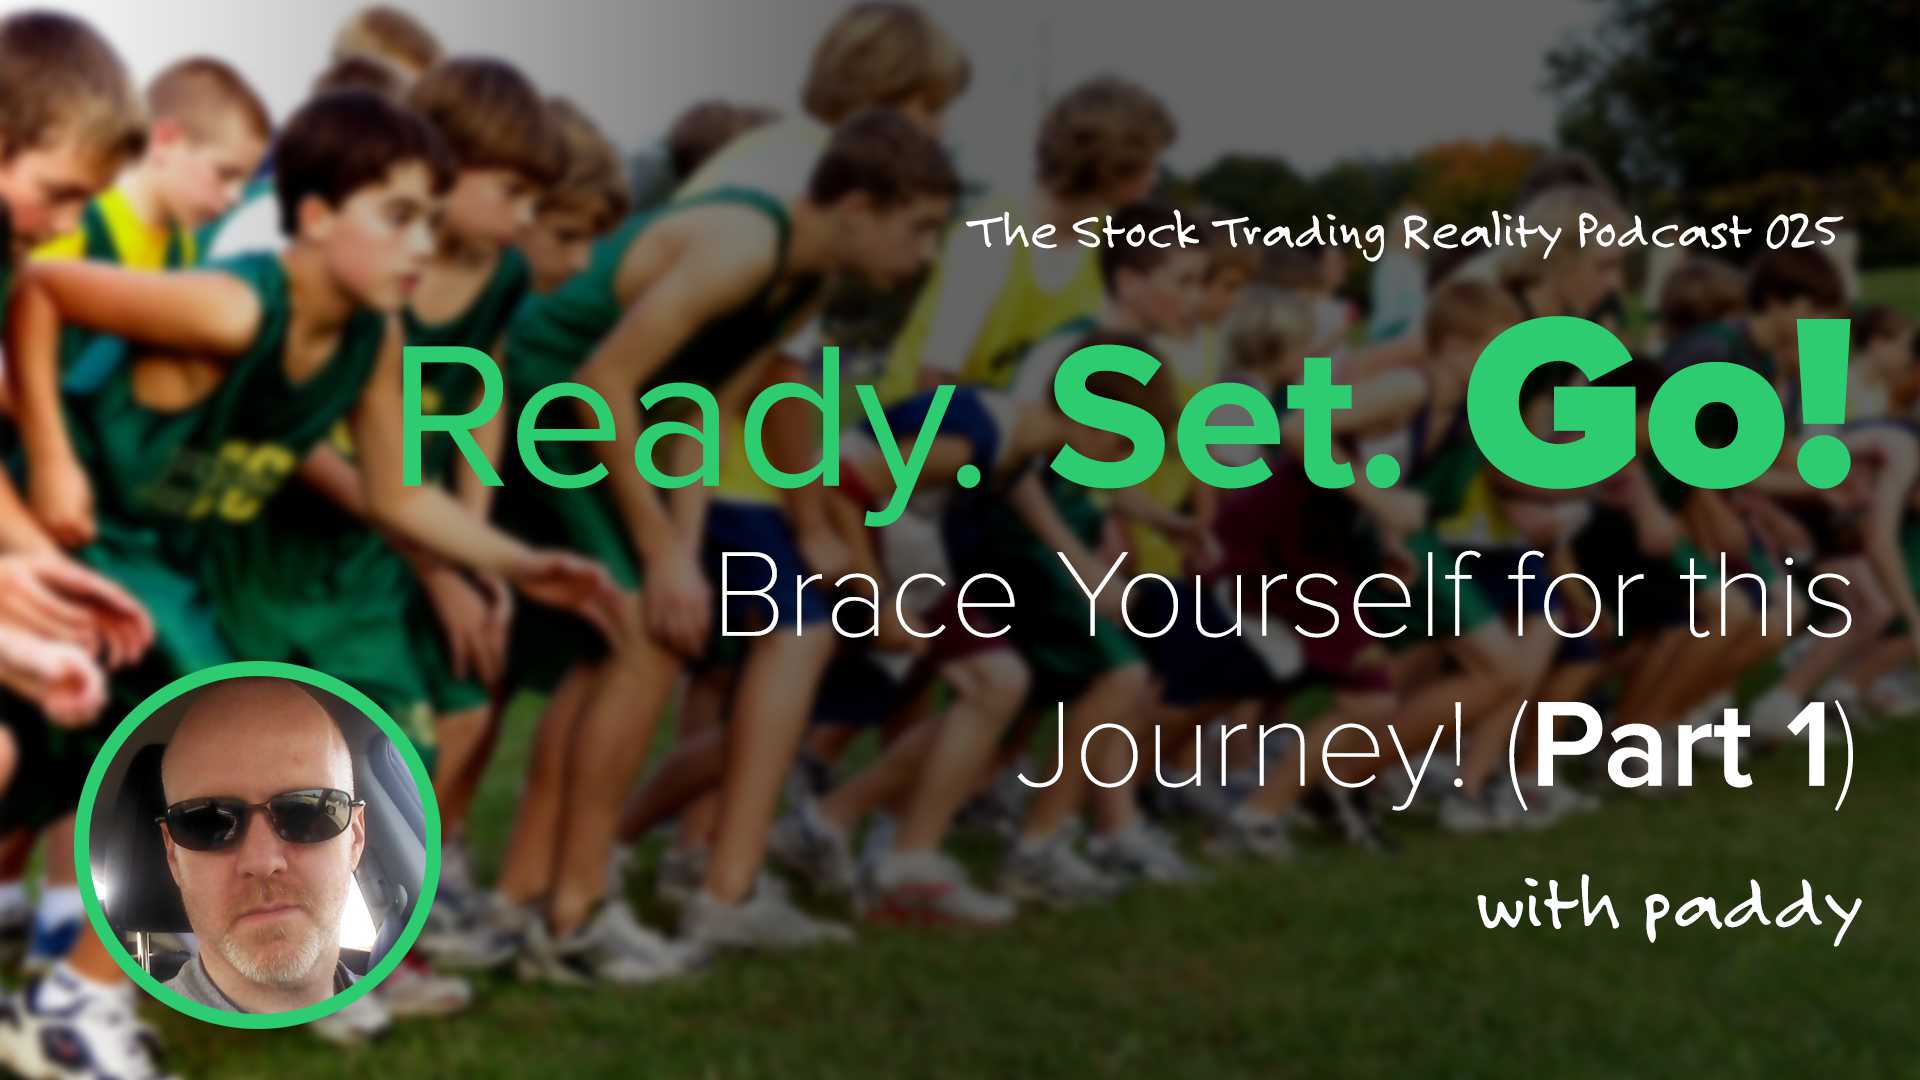 STR 025: Ready. Set. Go! Brace Yourself for this Journey! Part 1